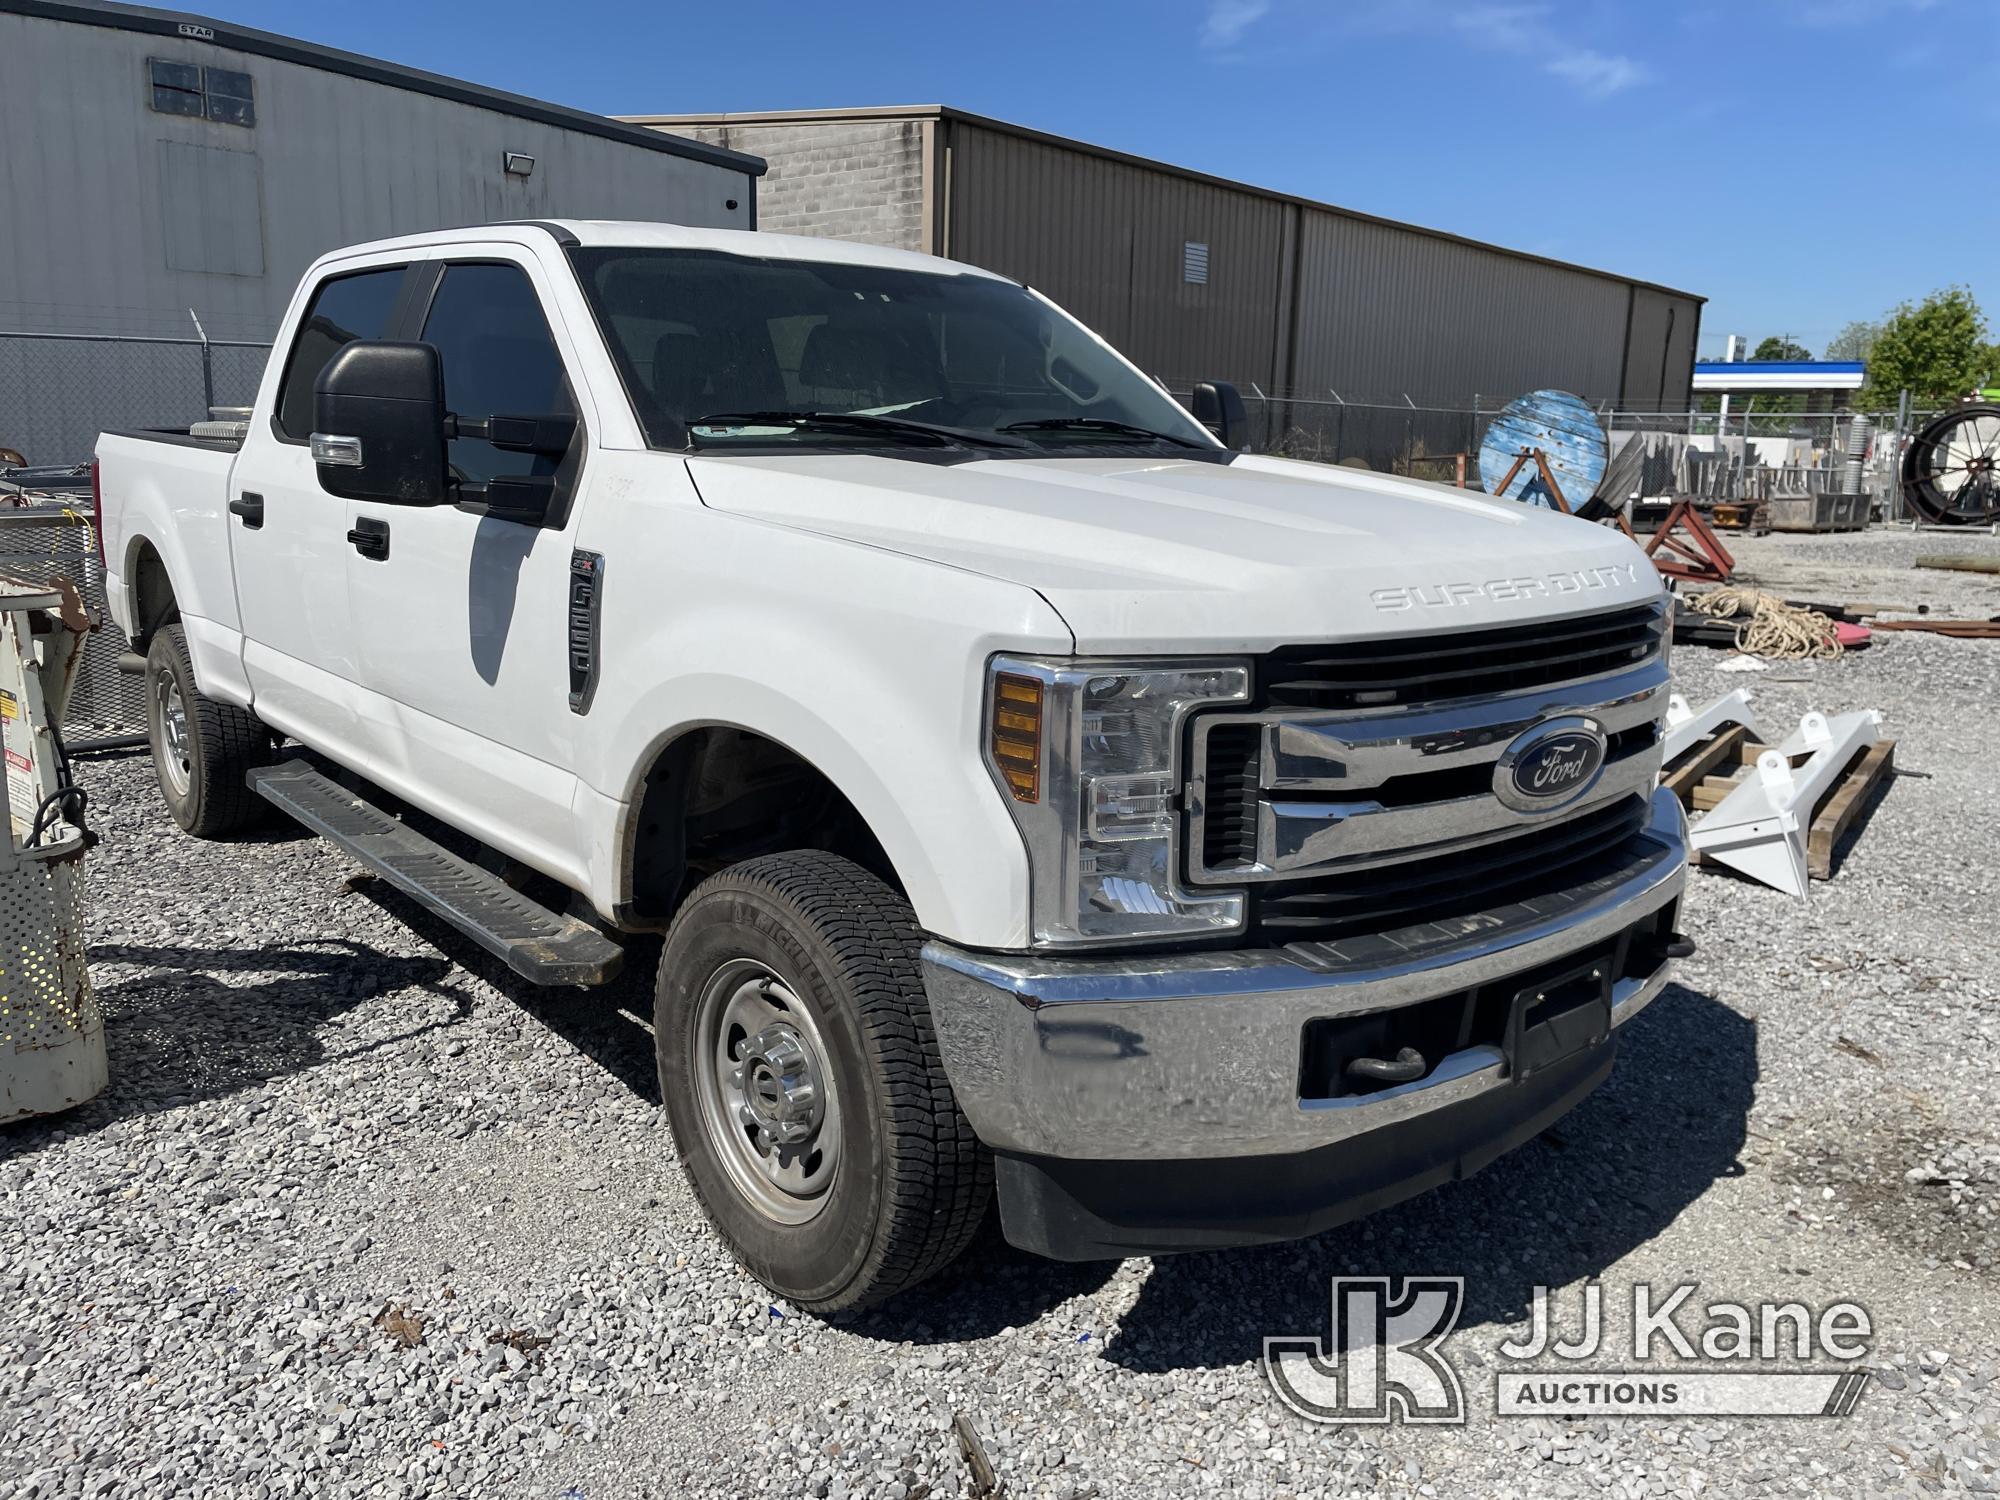 (Chattanooga, TN) 2019 Ford F250 4x4 Crew-Cab Pickup Truck Not Running & Condition Unknown) (Minor B